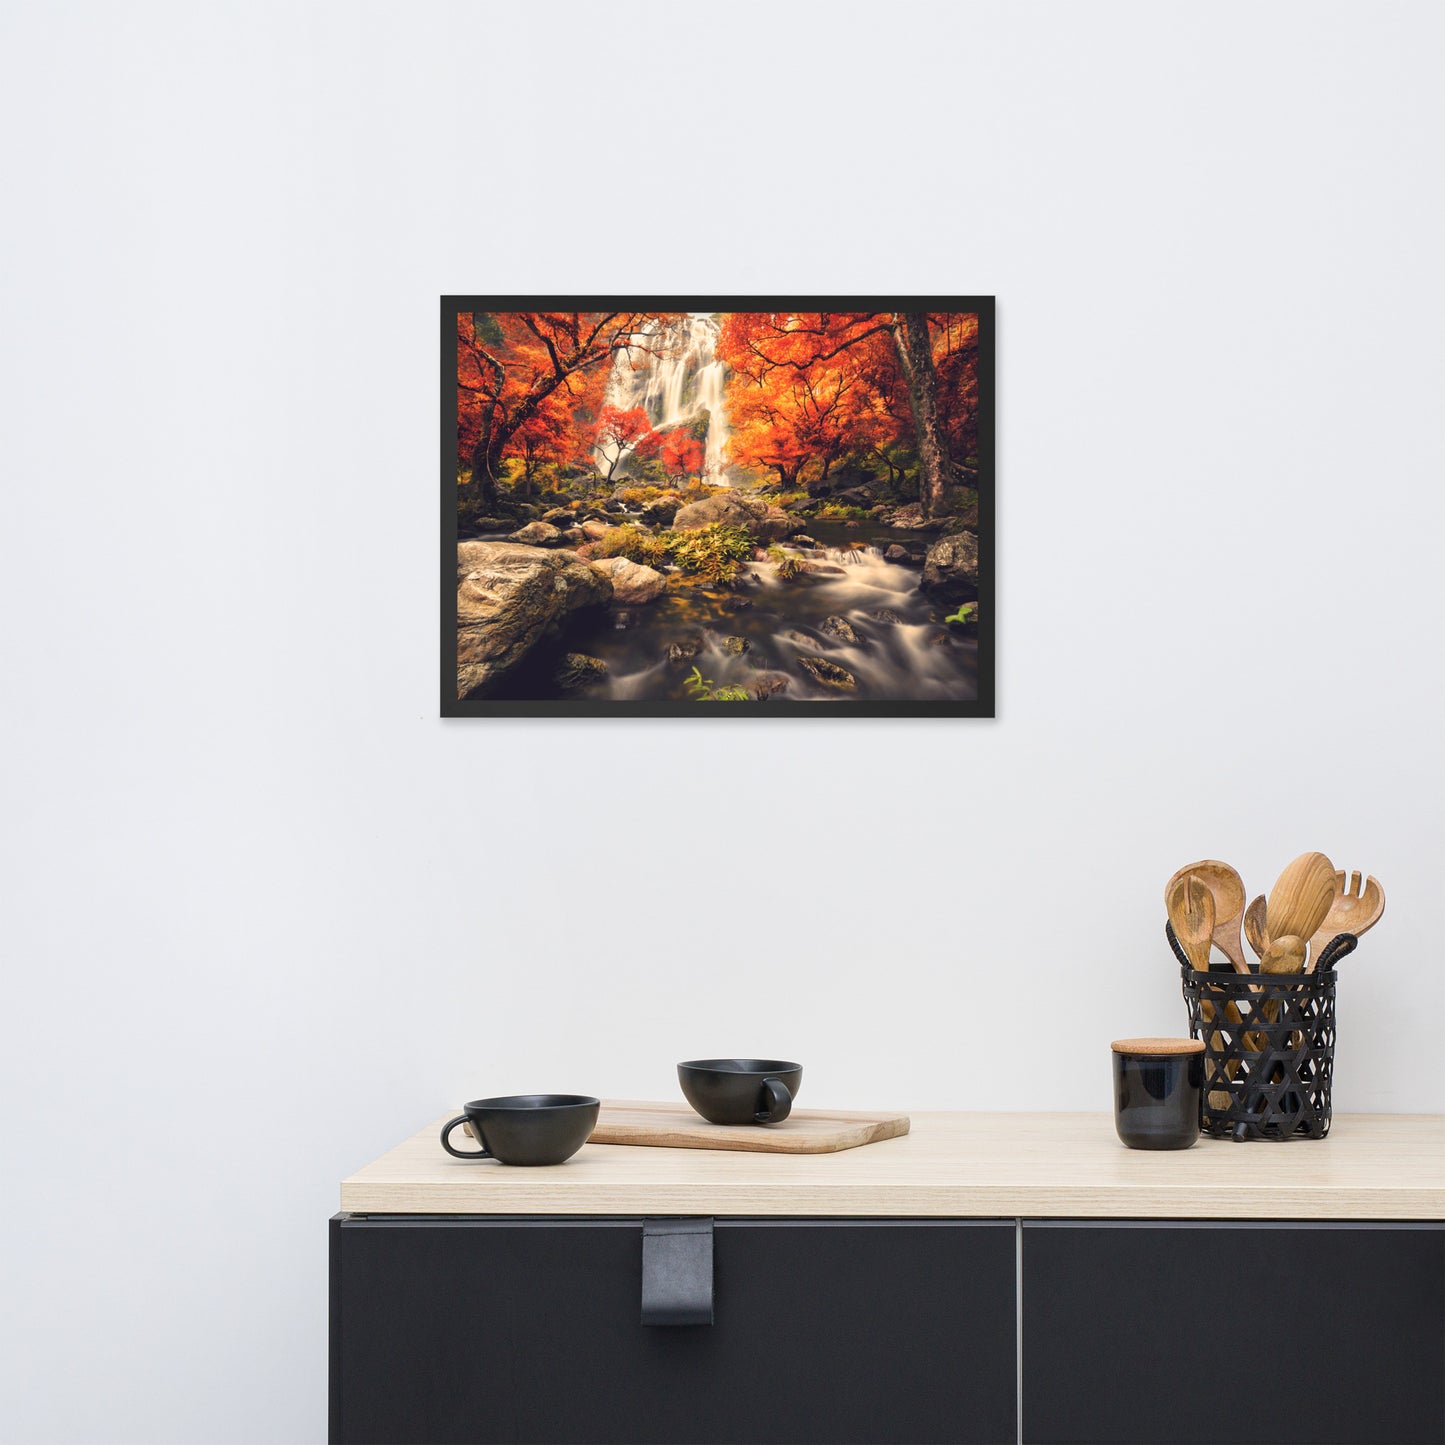 Waterfall in the Autumn with Golden Shadow Effect Framed Wall Art Prints